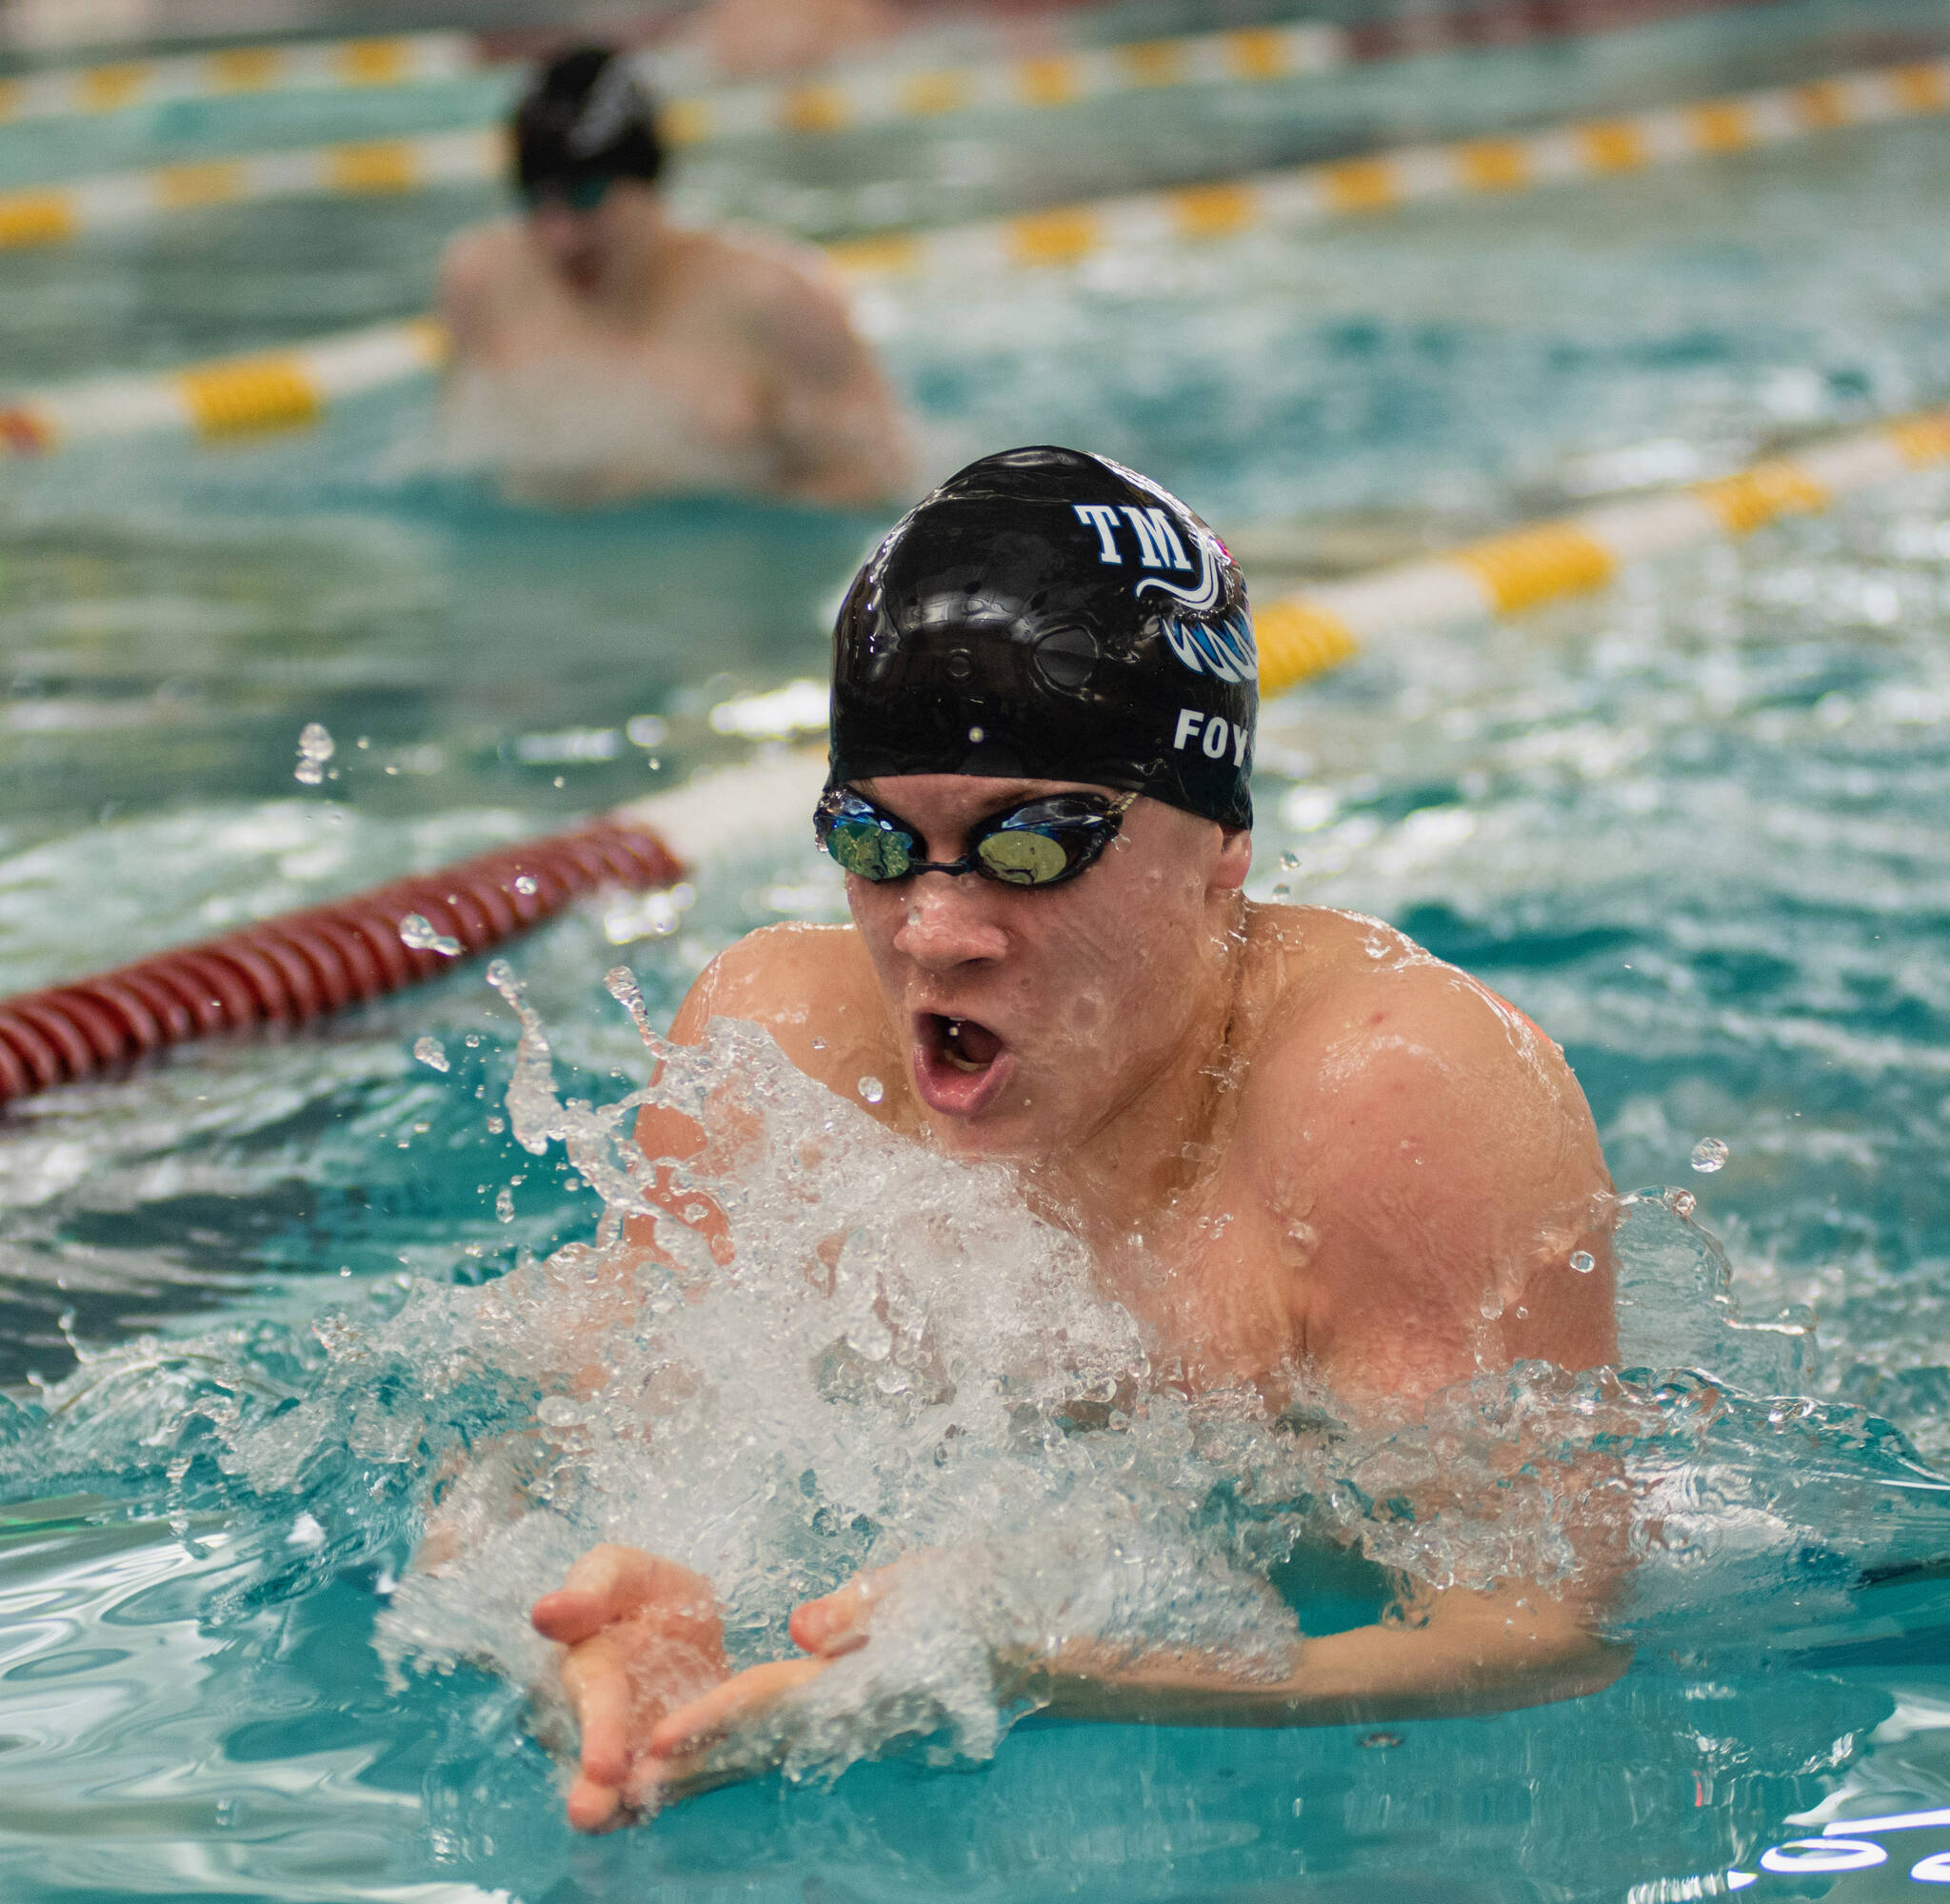 Thunder Mountain High School senior PJ Foy swims to victory in the 100 breast at last weekend’s Region V Championships in Sitka. The multi-state record holder will be looking to add to his total this weekend at Juneau’s Dimond Park Aquatic Center. (James Poulson/Daily Sitka Sentinel)